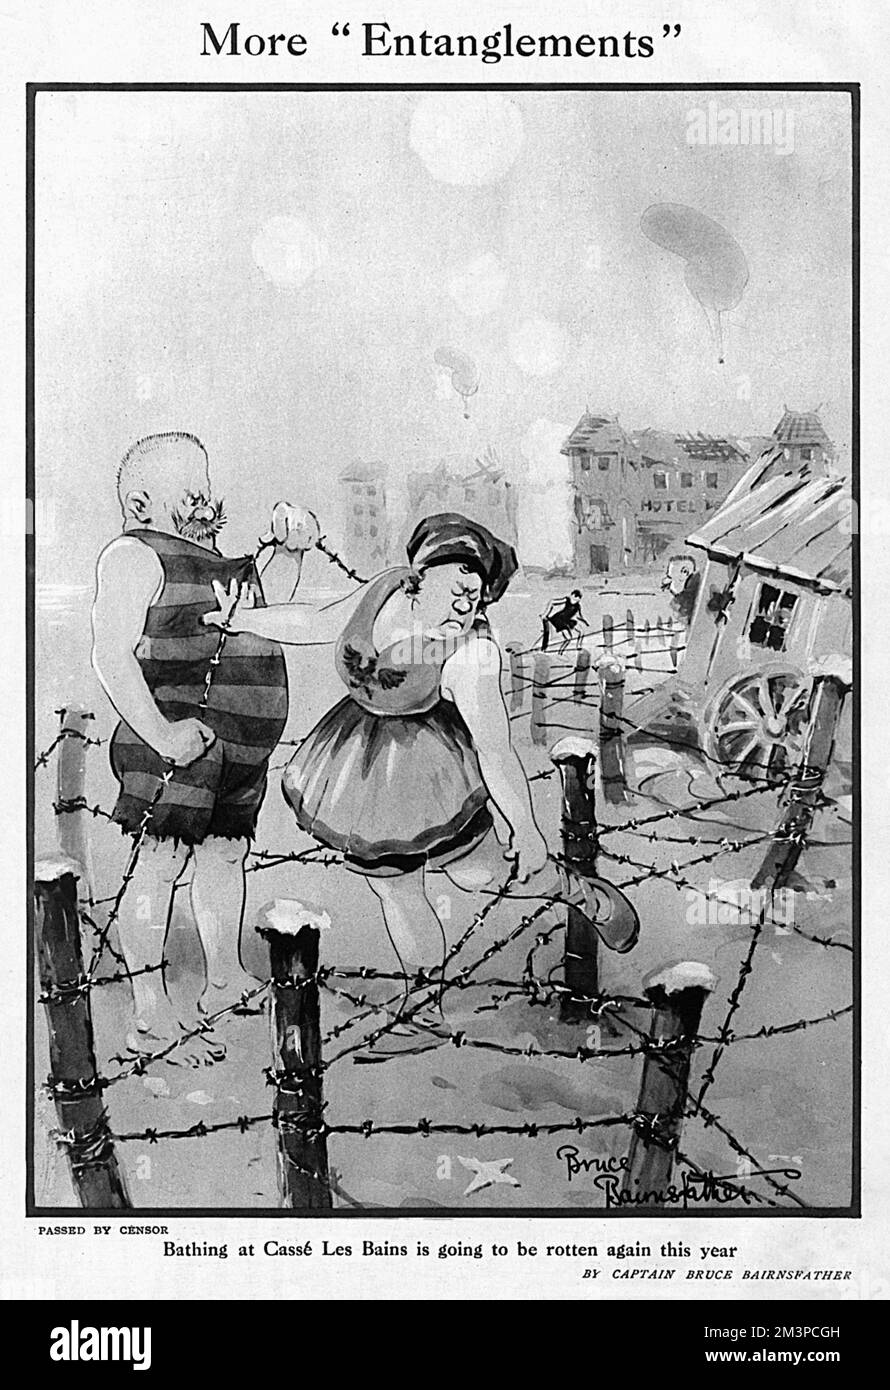 Bathing at Casse Les Bains is going to be rotten again this year. Two stereotypically grouchy looking Germans in bathing costumes do their best to enjoy a seaside holiday despite the barbed wire entanglements on a beach.  1917 Stock Photo